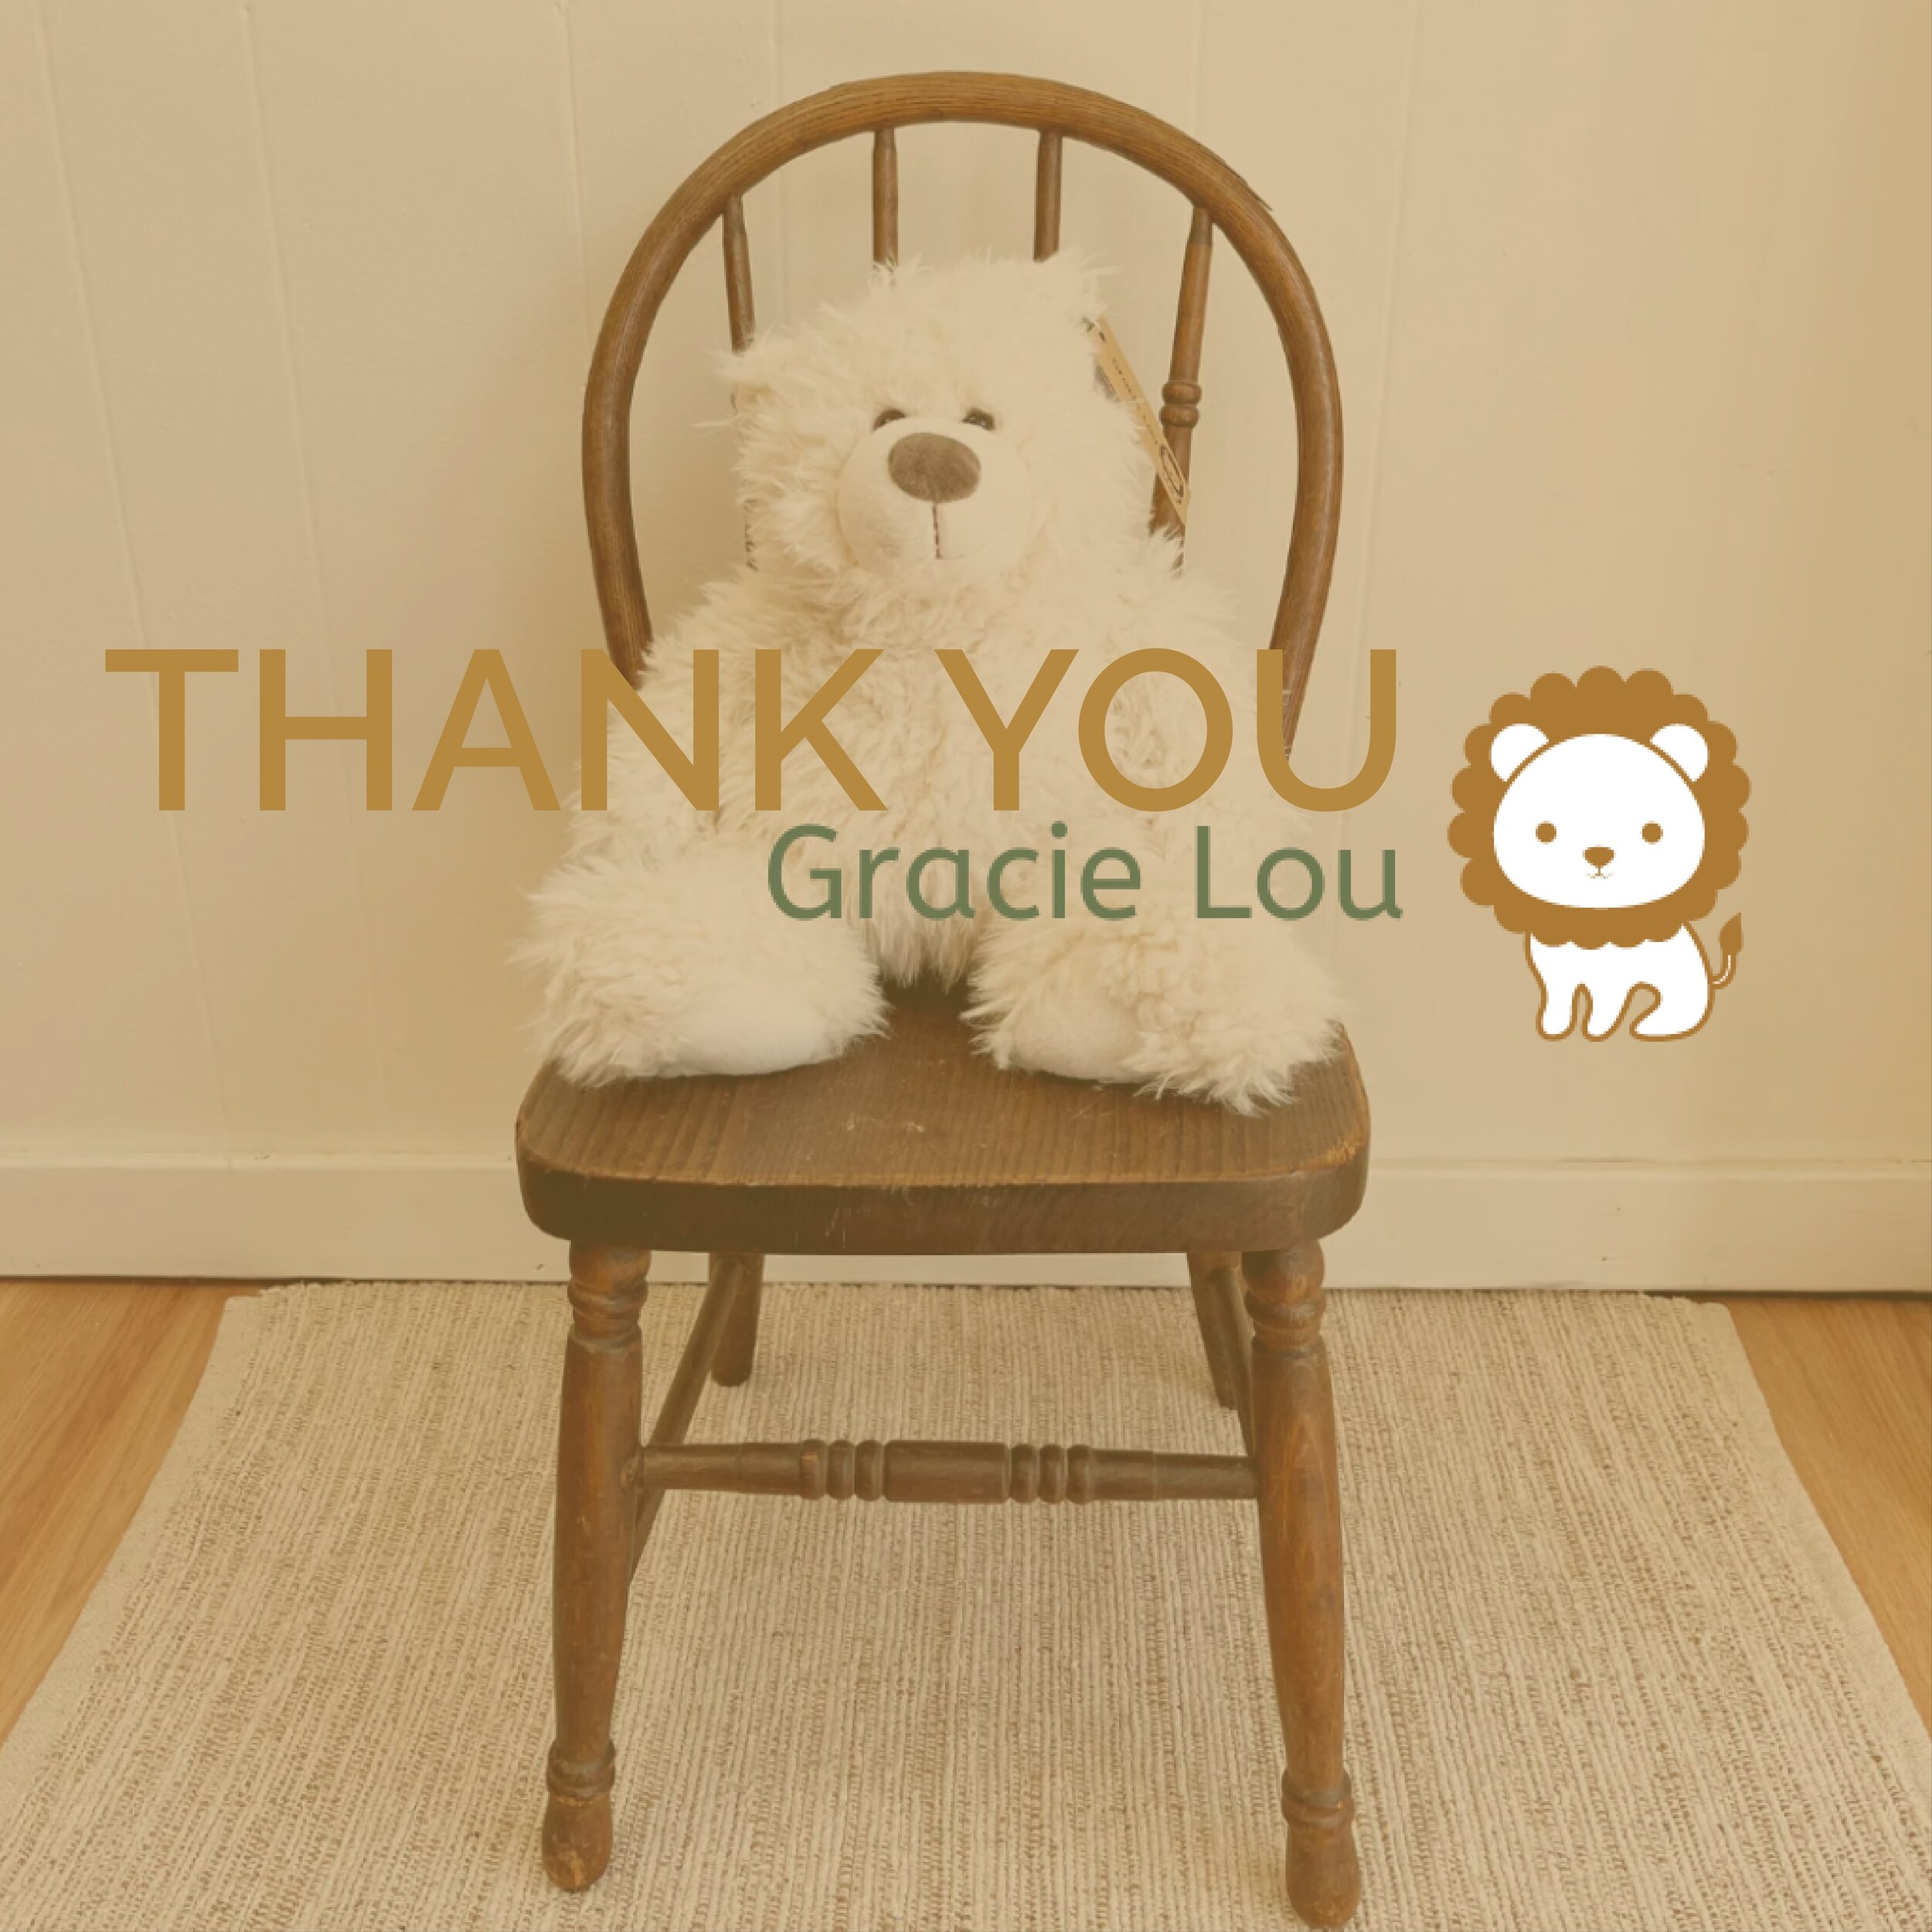 Thank you so much to our newfound friend, Sarah, from @hellogracielou for donating this cutest mini spindle chair to the Madisons! We&rsquo;re so excited to announce that between now and March 26th, Gracie Lou will donate 10% of all purchases to the 